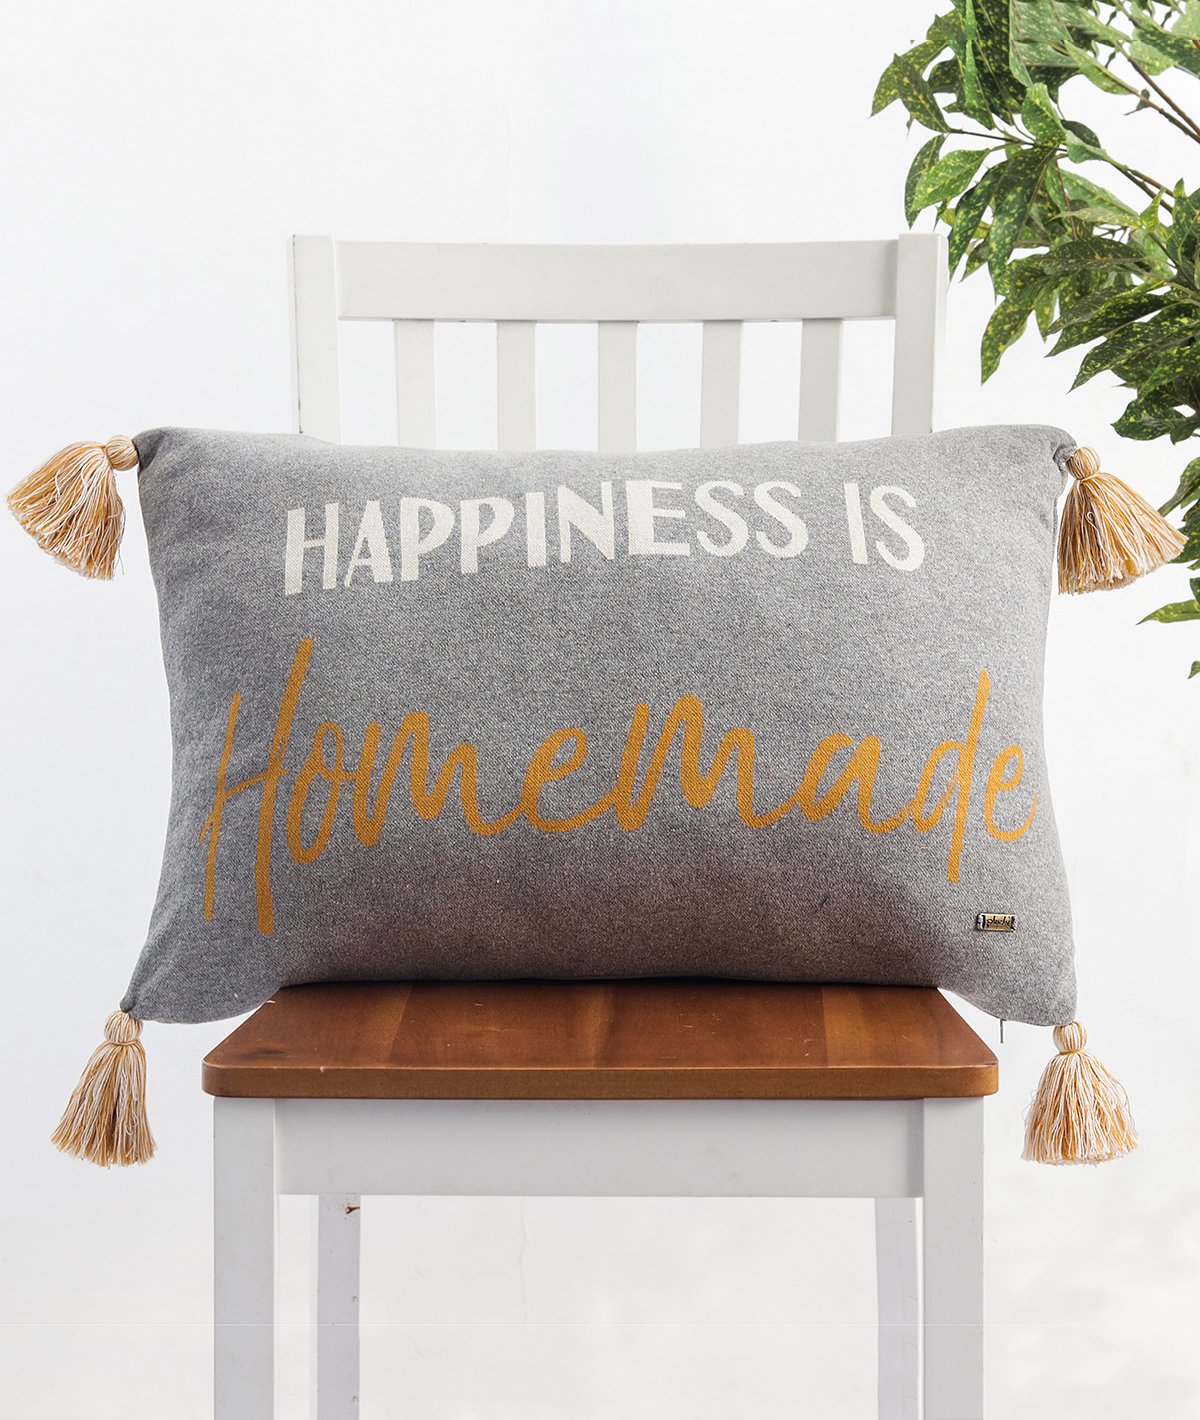 Happiness Is Homemade Cotton Knitted Decorative Light Grey Color 16 x 24 Inches Pillow Covers